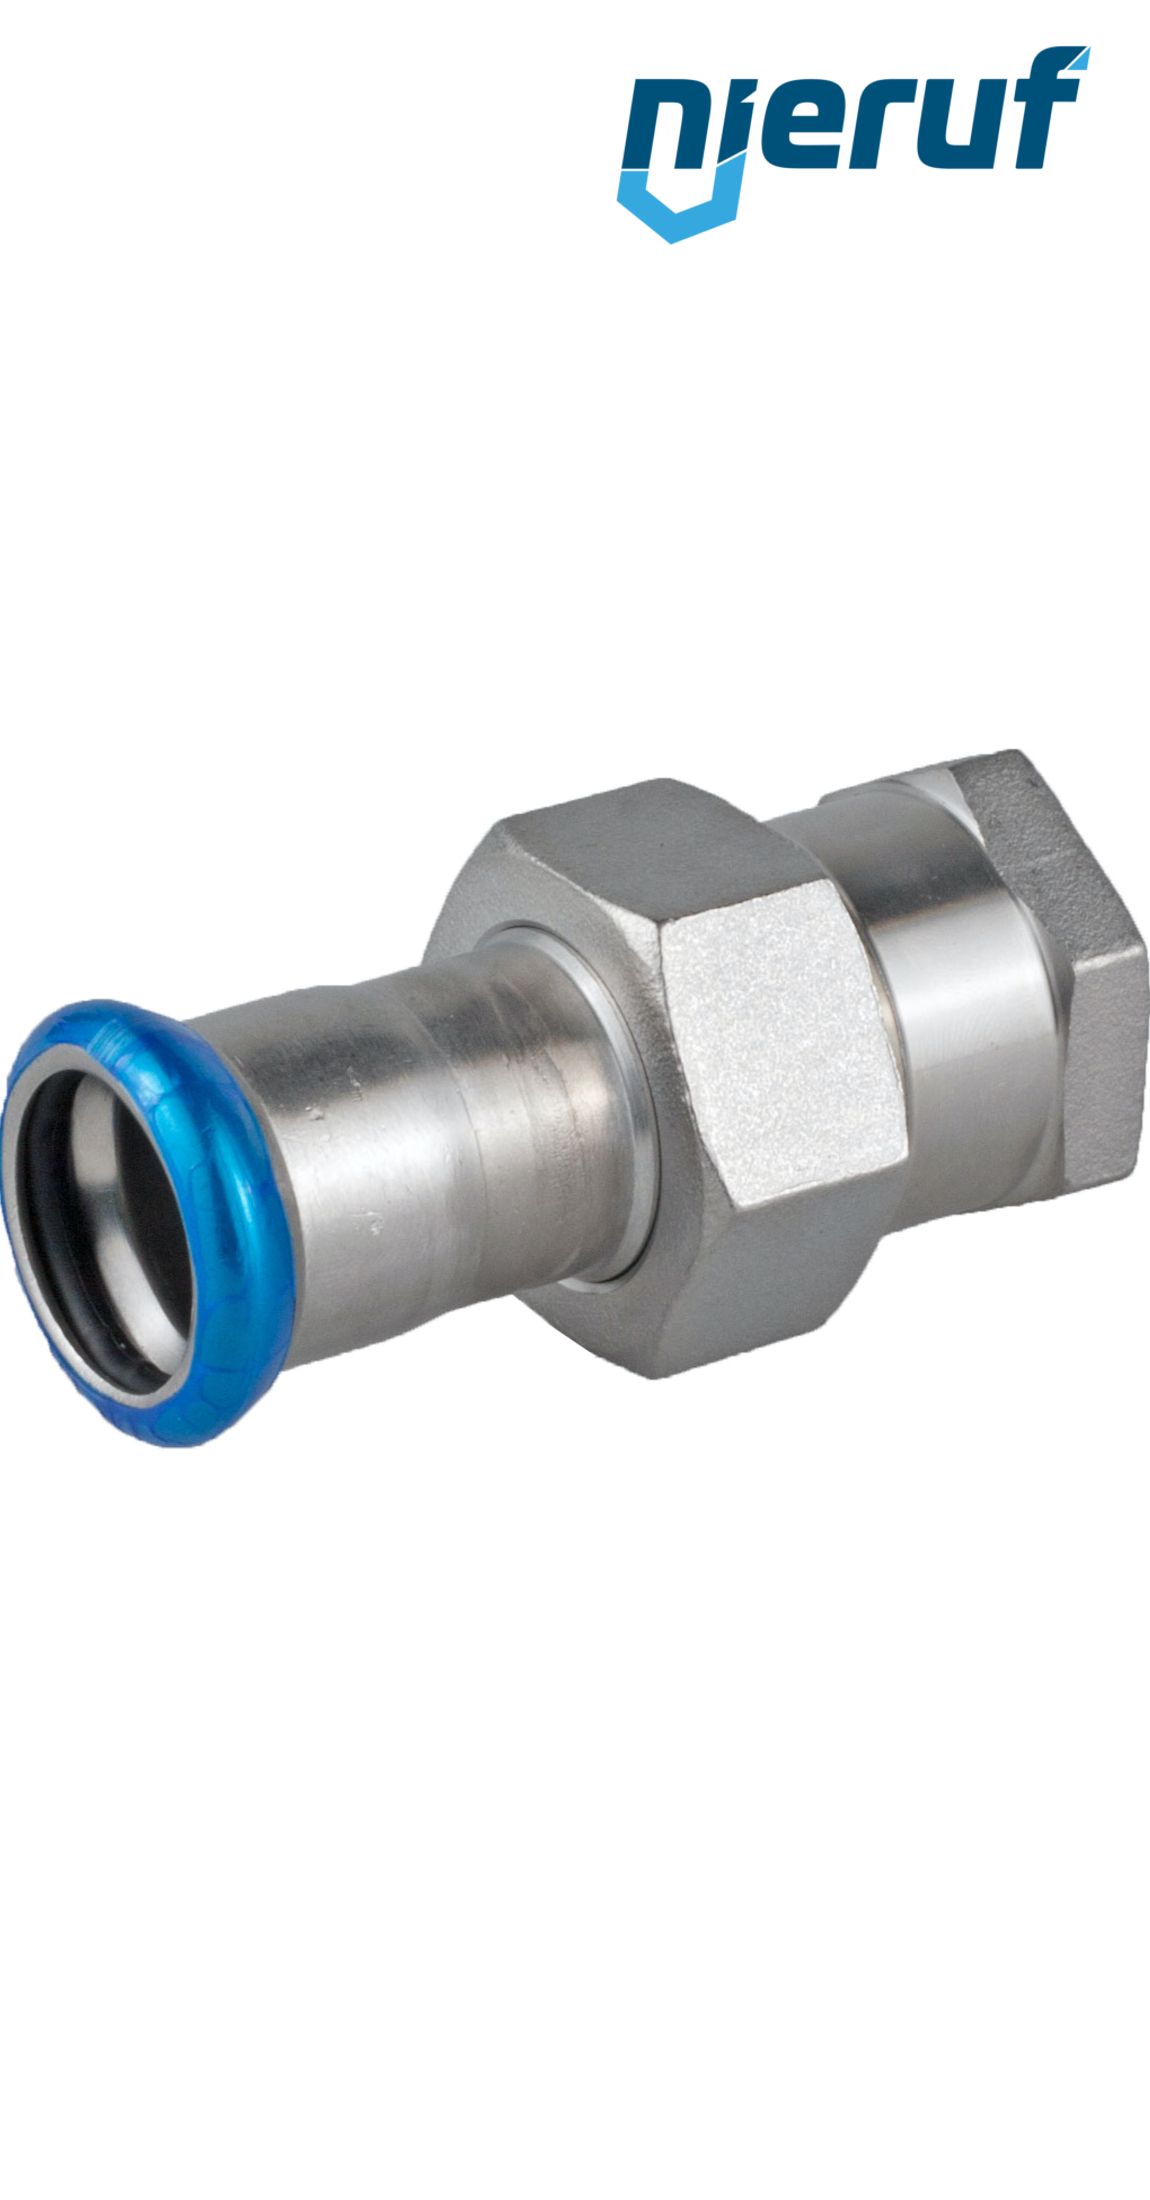 Union Coupling Pressfitting F DN32 - 35,0 mm female thread 1 1/4" inch stainless steel